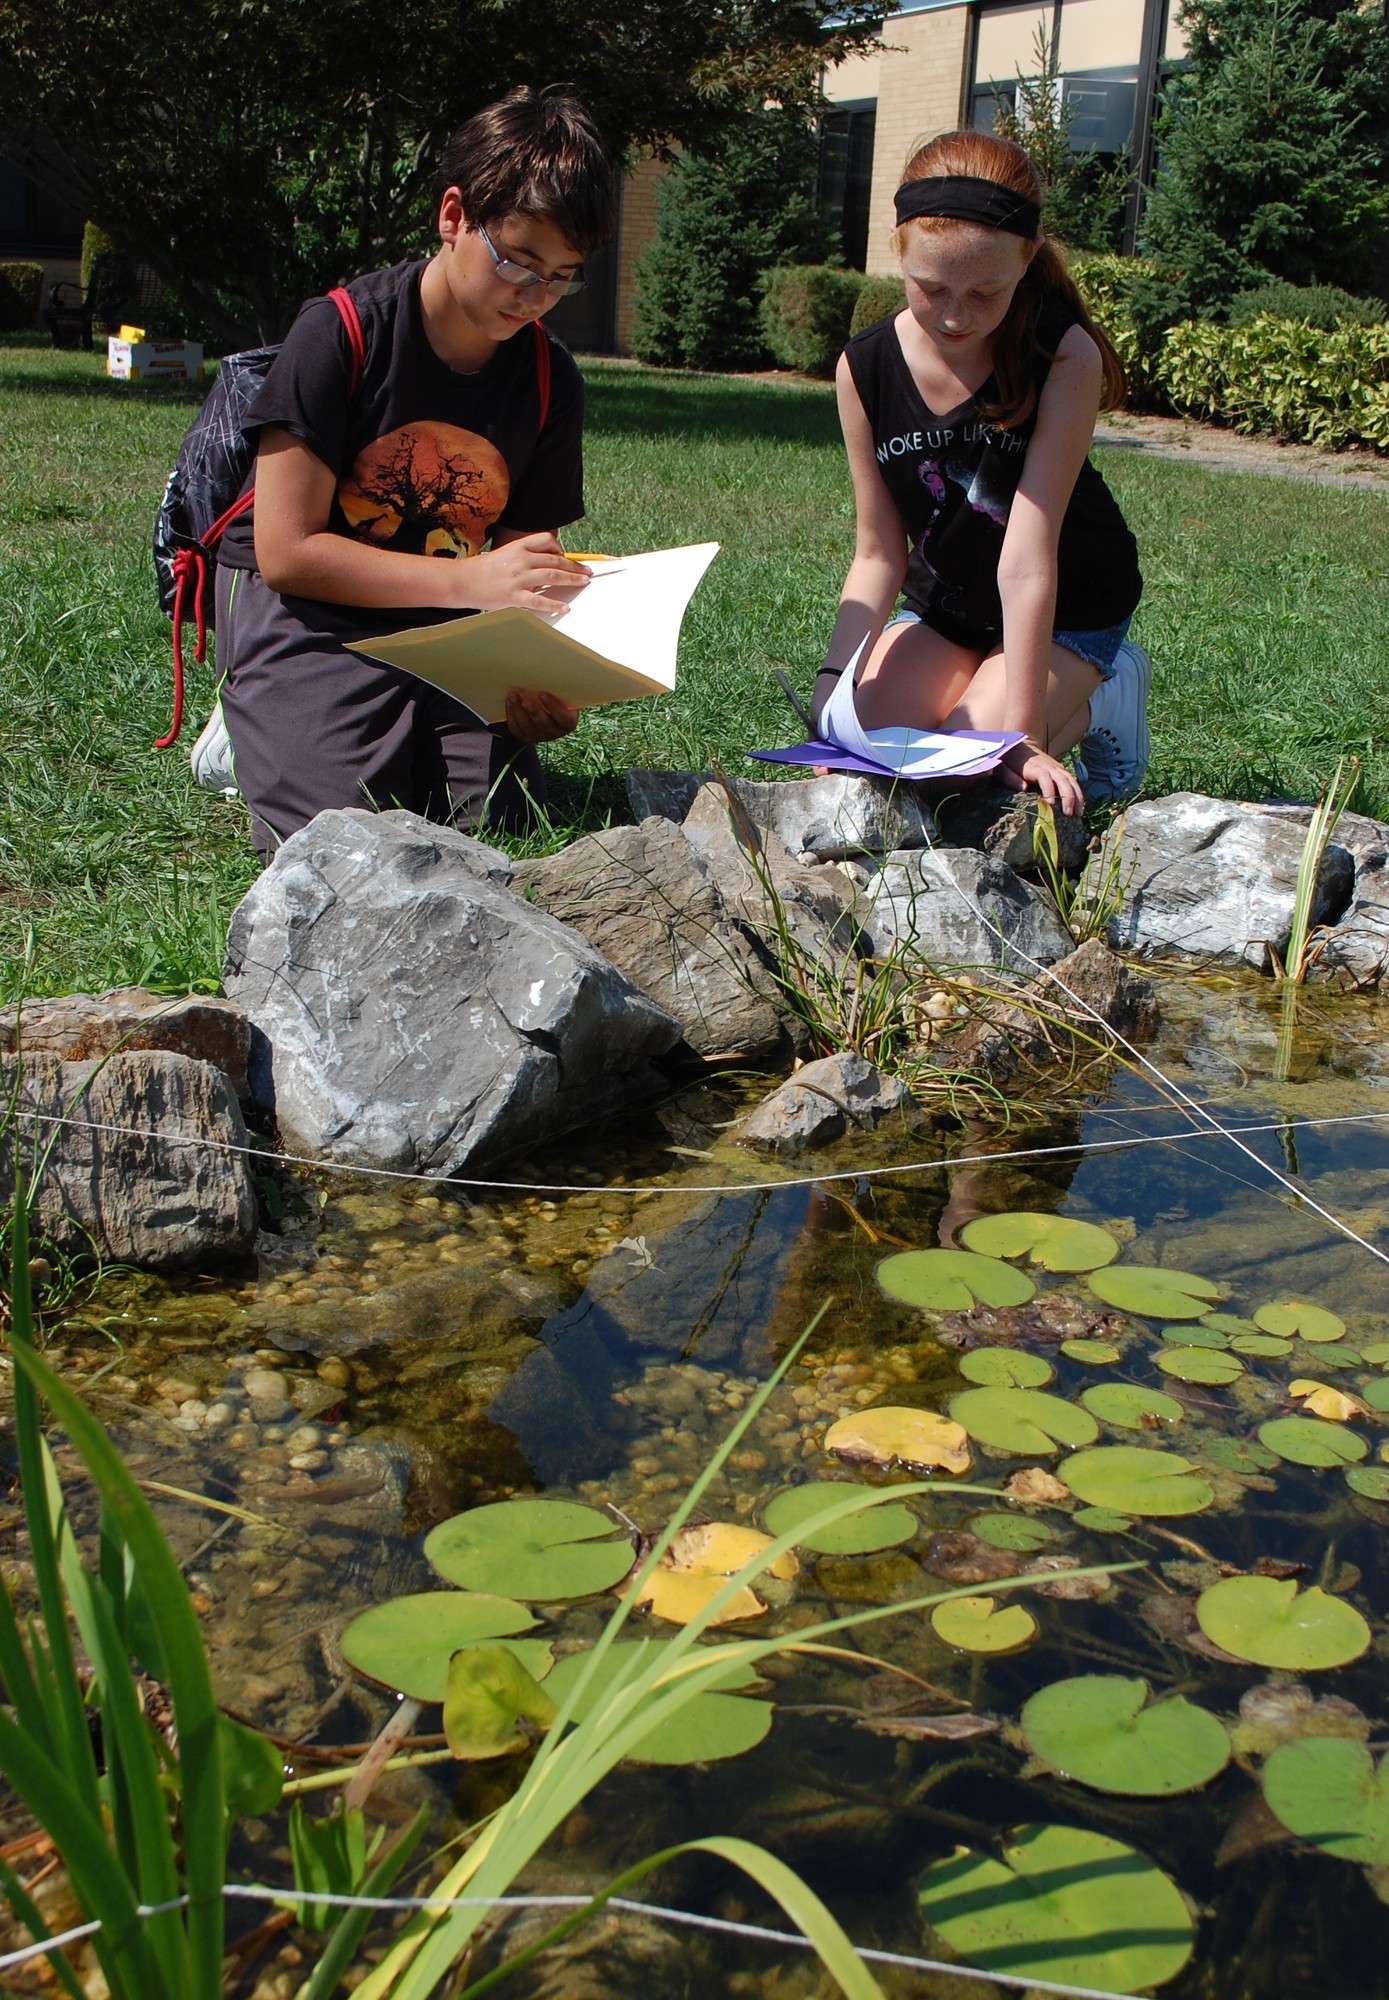 Seventh-graders Nick Logozzo and Julie Magliano looked at the pond and made observations.